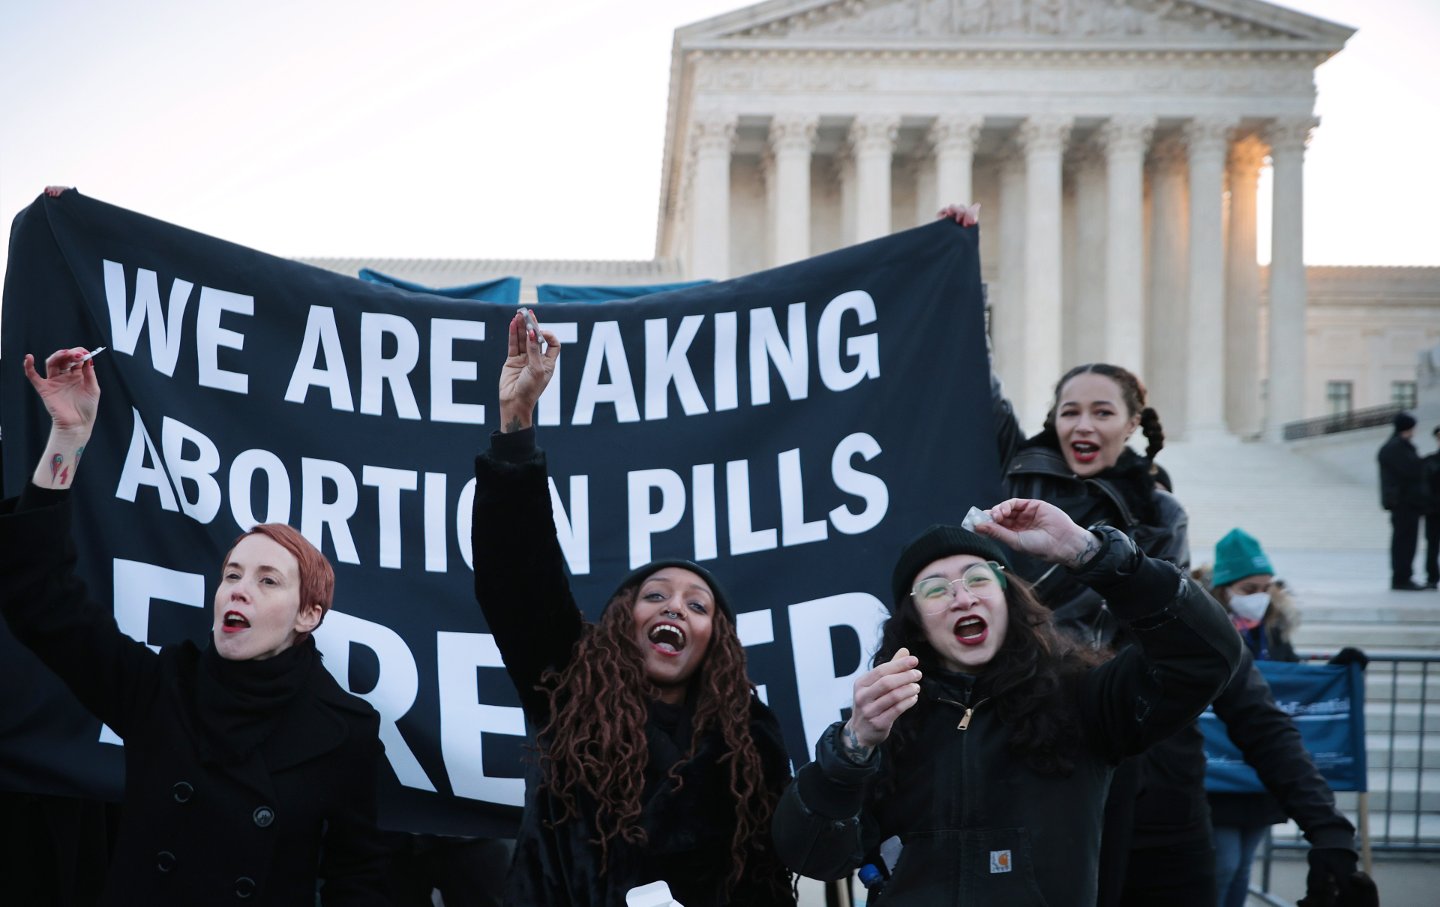 Protesters hold a huge banner reading "We Are Taking Abortion Pills Forever" in front of the Supreme Court Building.